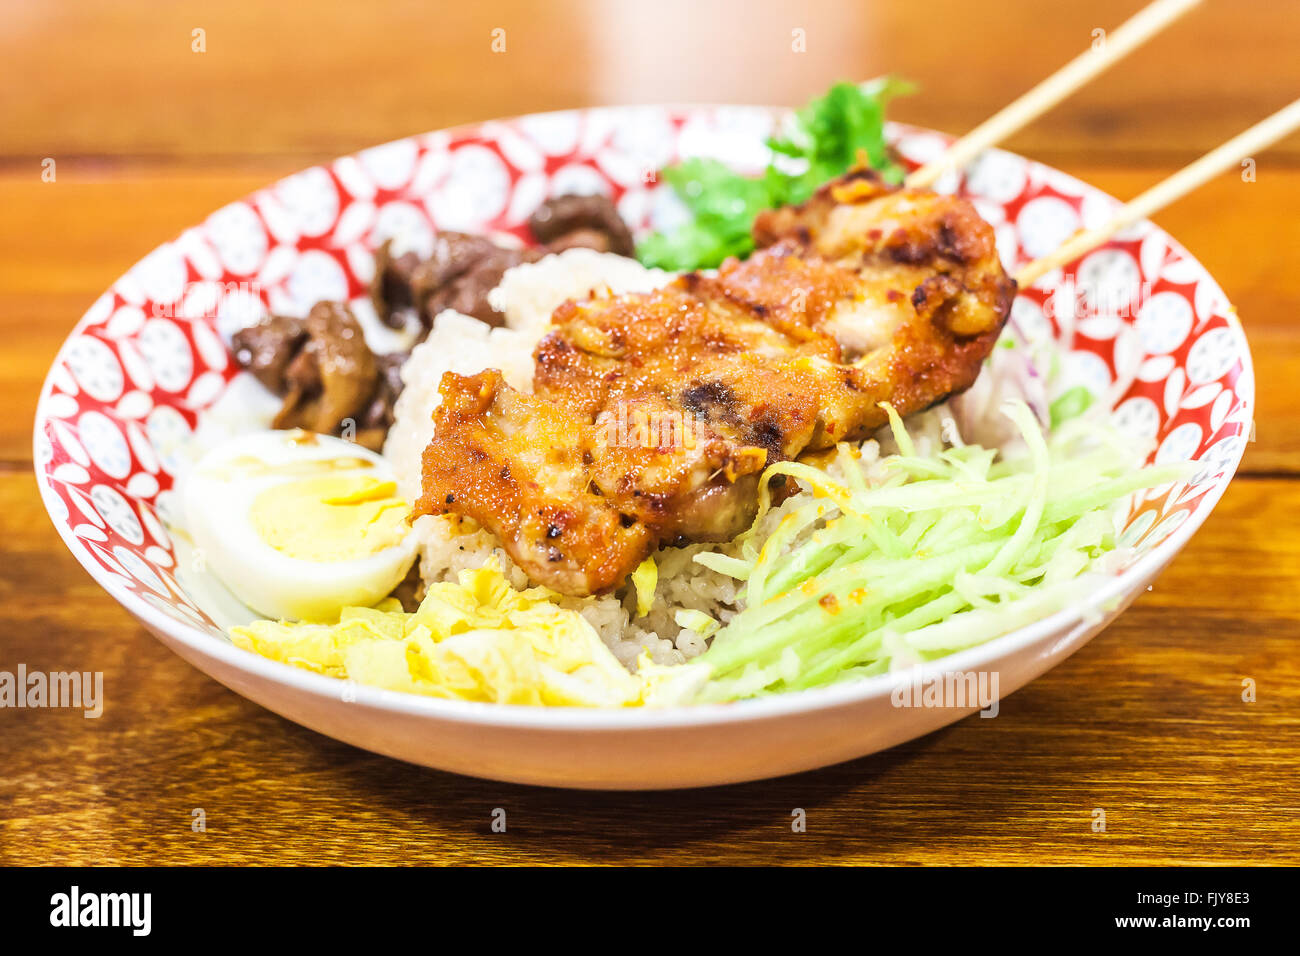 Rice Mixed with Shrimp paste and chicken grill In restaurant Stock Photo